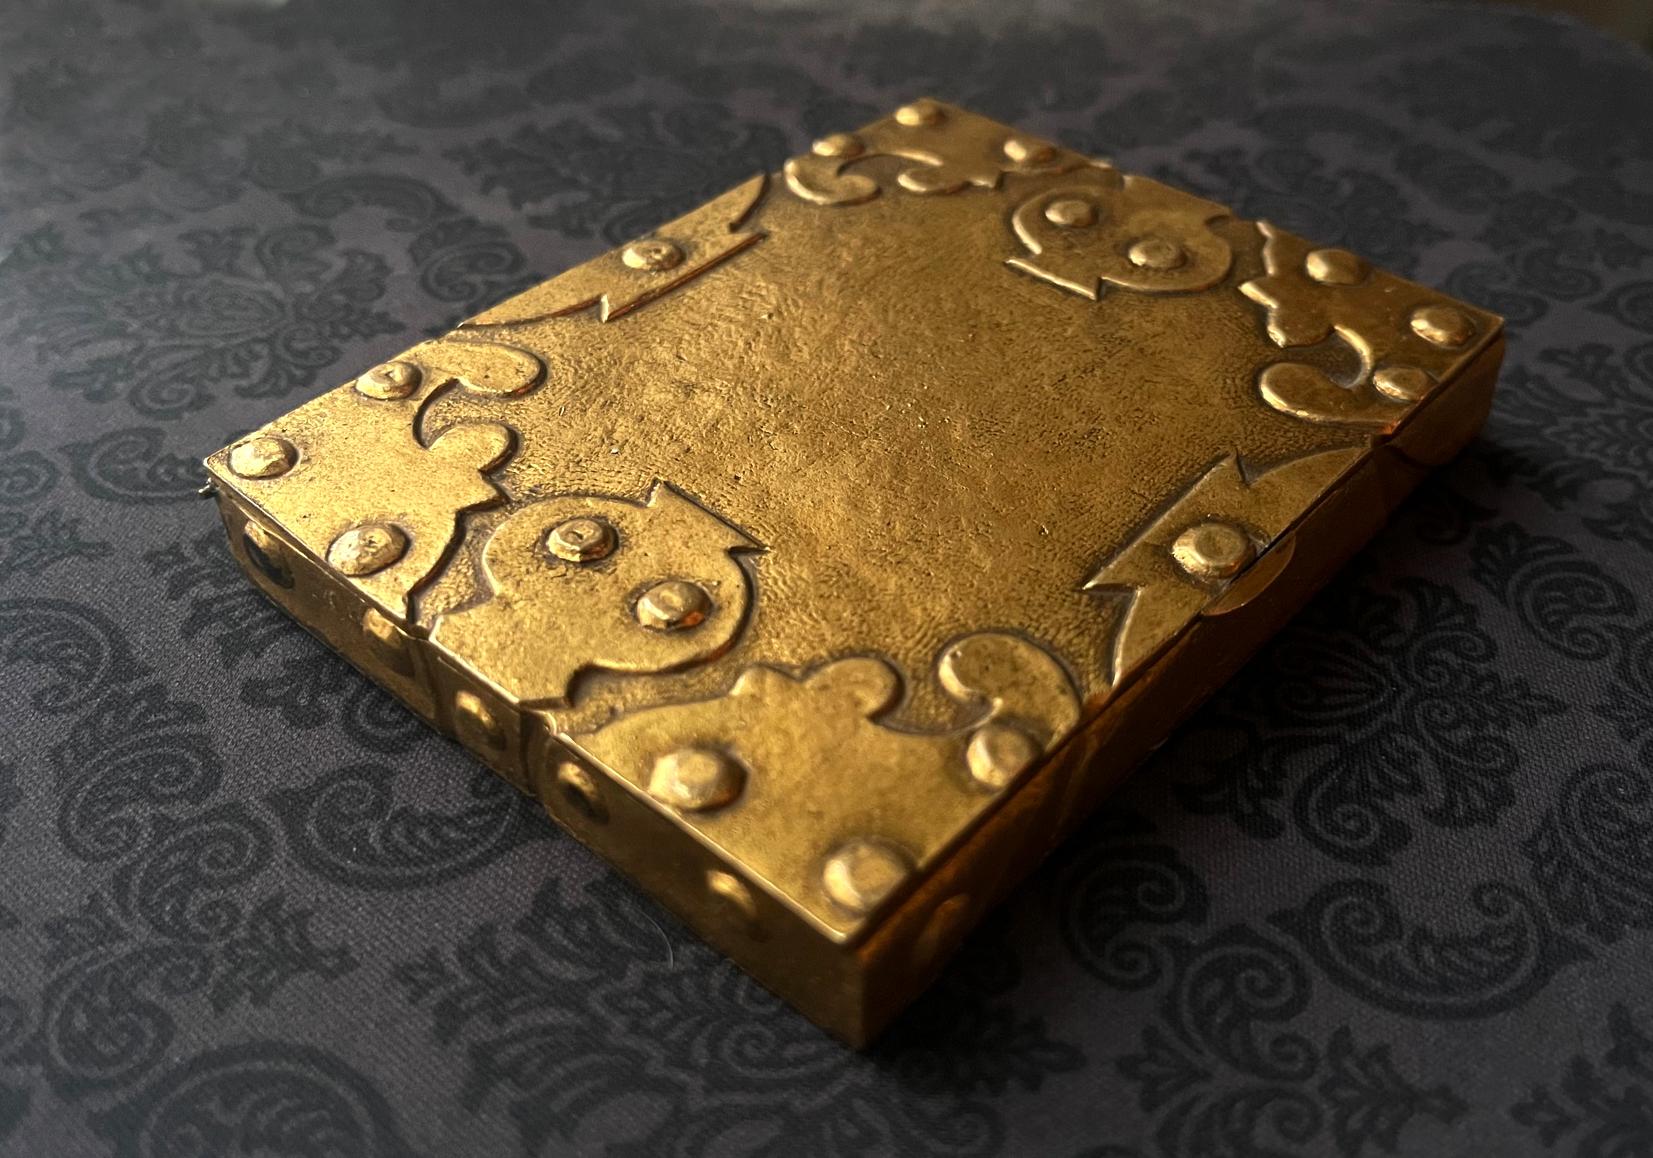 A large bonze box (based on the size, it is likely a card case) by French Parisian art jewelry designer Line Vautrin (1913-1997) circa 1950s. The box features an interesting design in which stylized hinges were folded over on the edges and corners